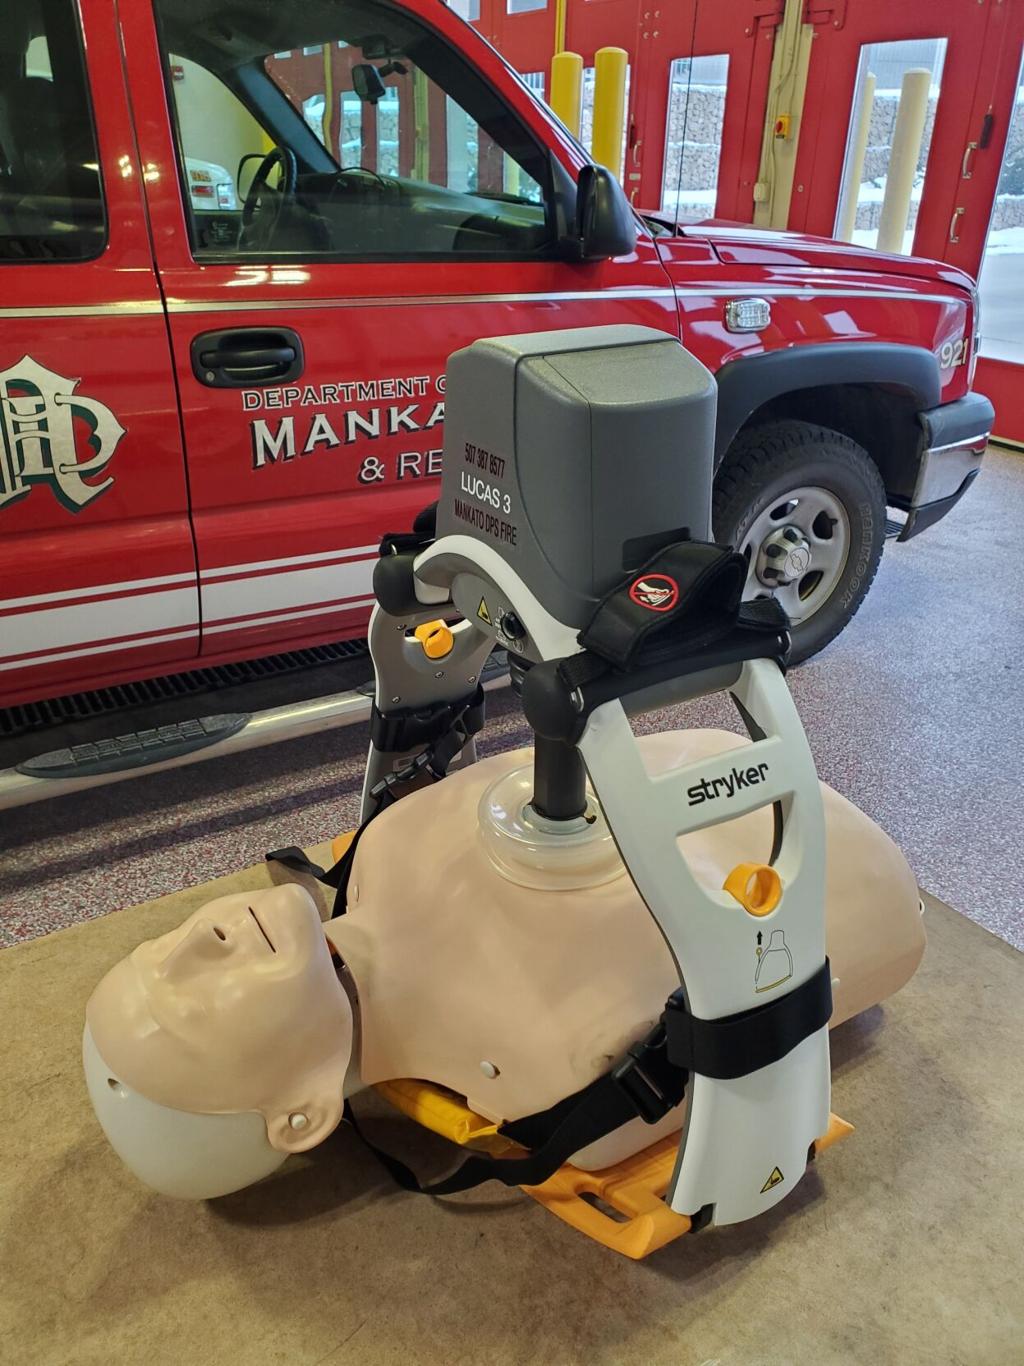 CPR device will aid Mankato firefighters, patients, Local News